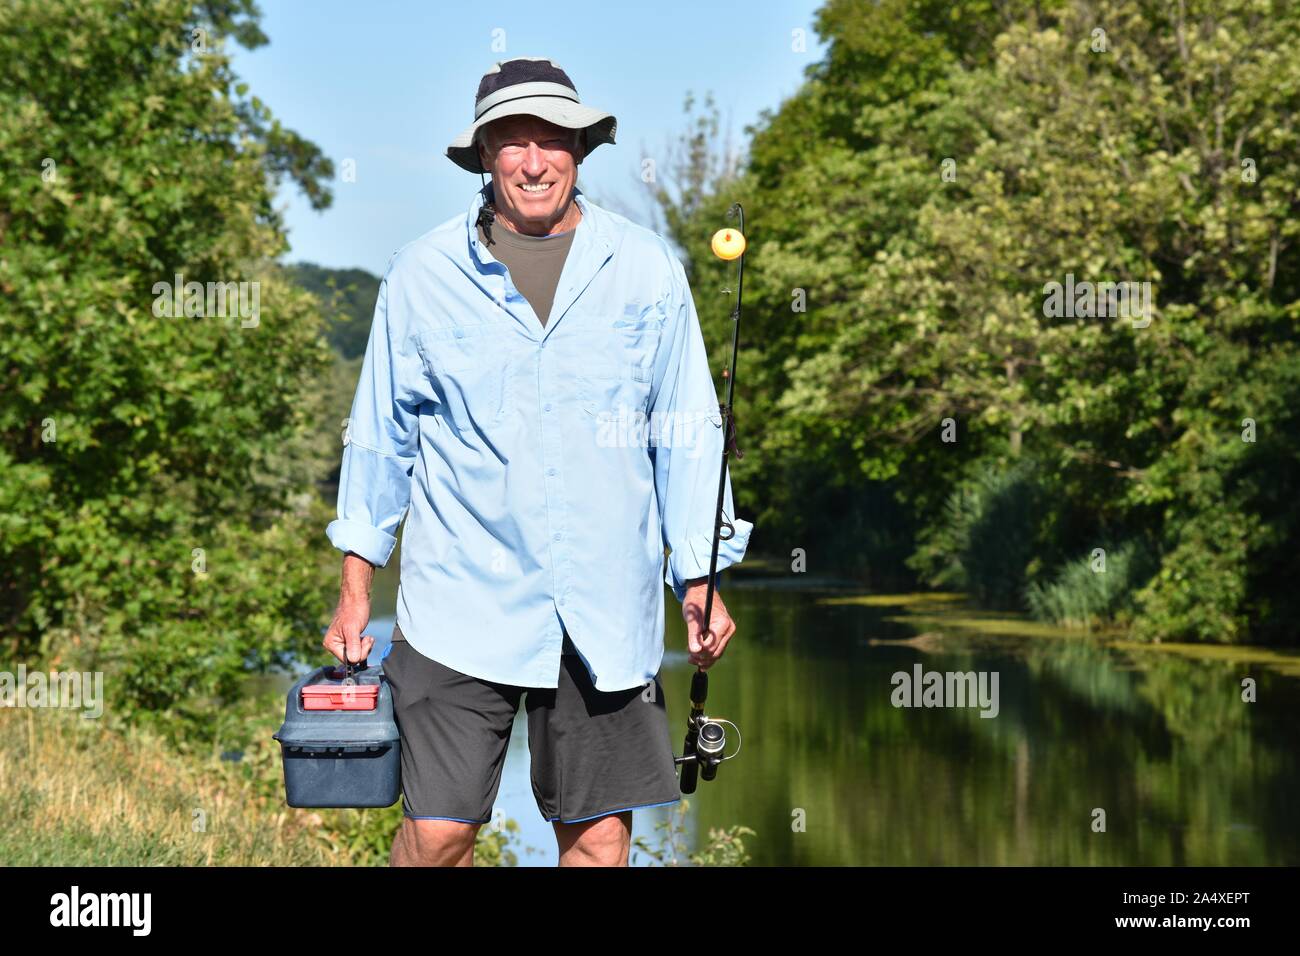 https://c8.alamy.com/comp/2A4XEPT/male-fisherman-outdoors-with-rod-and-reel-fishing-2A4XEPT.jpg